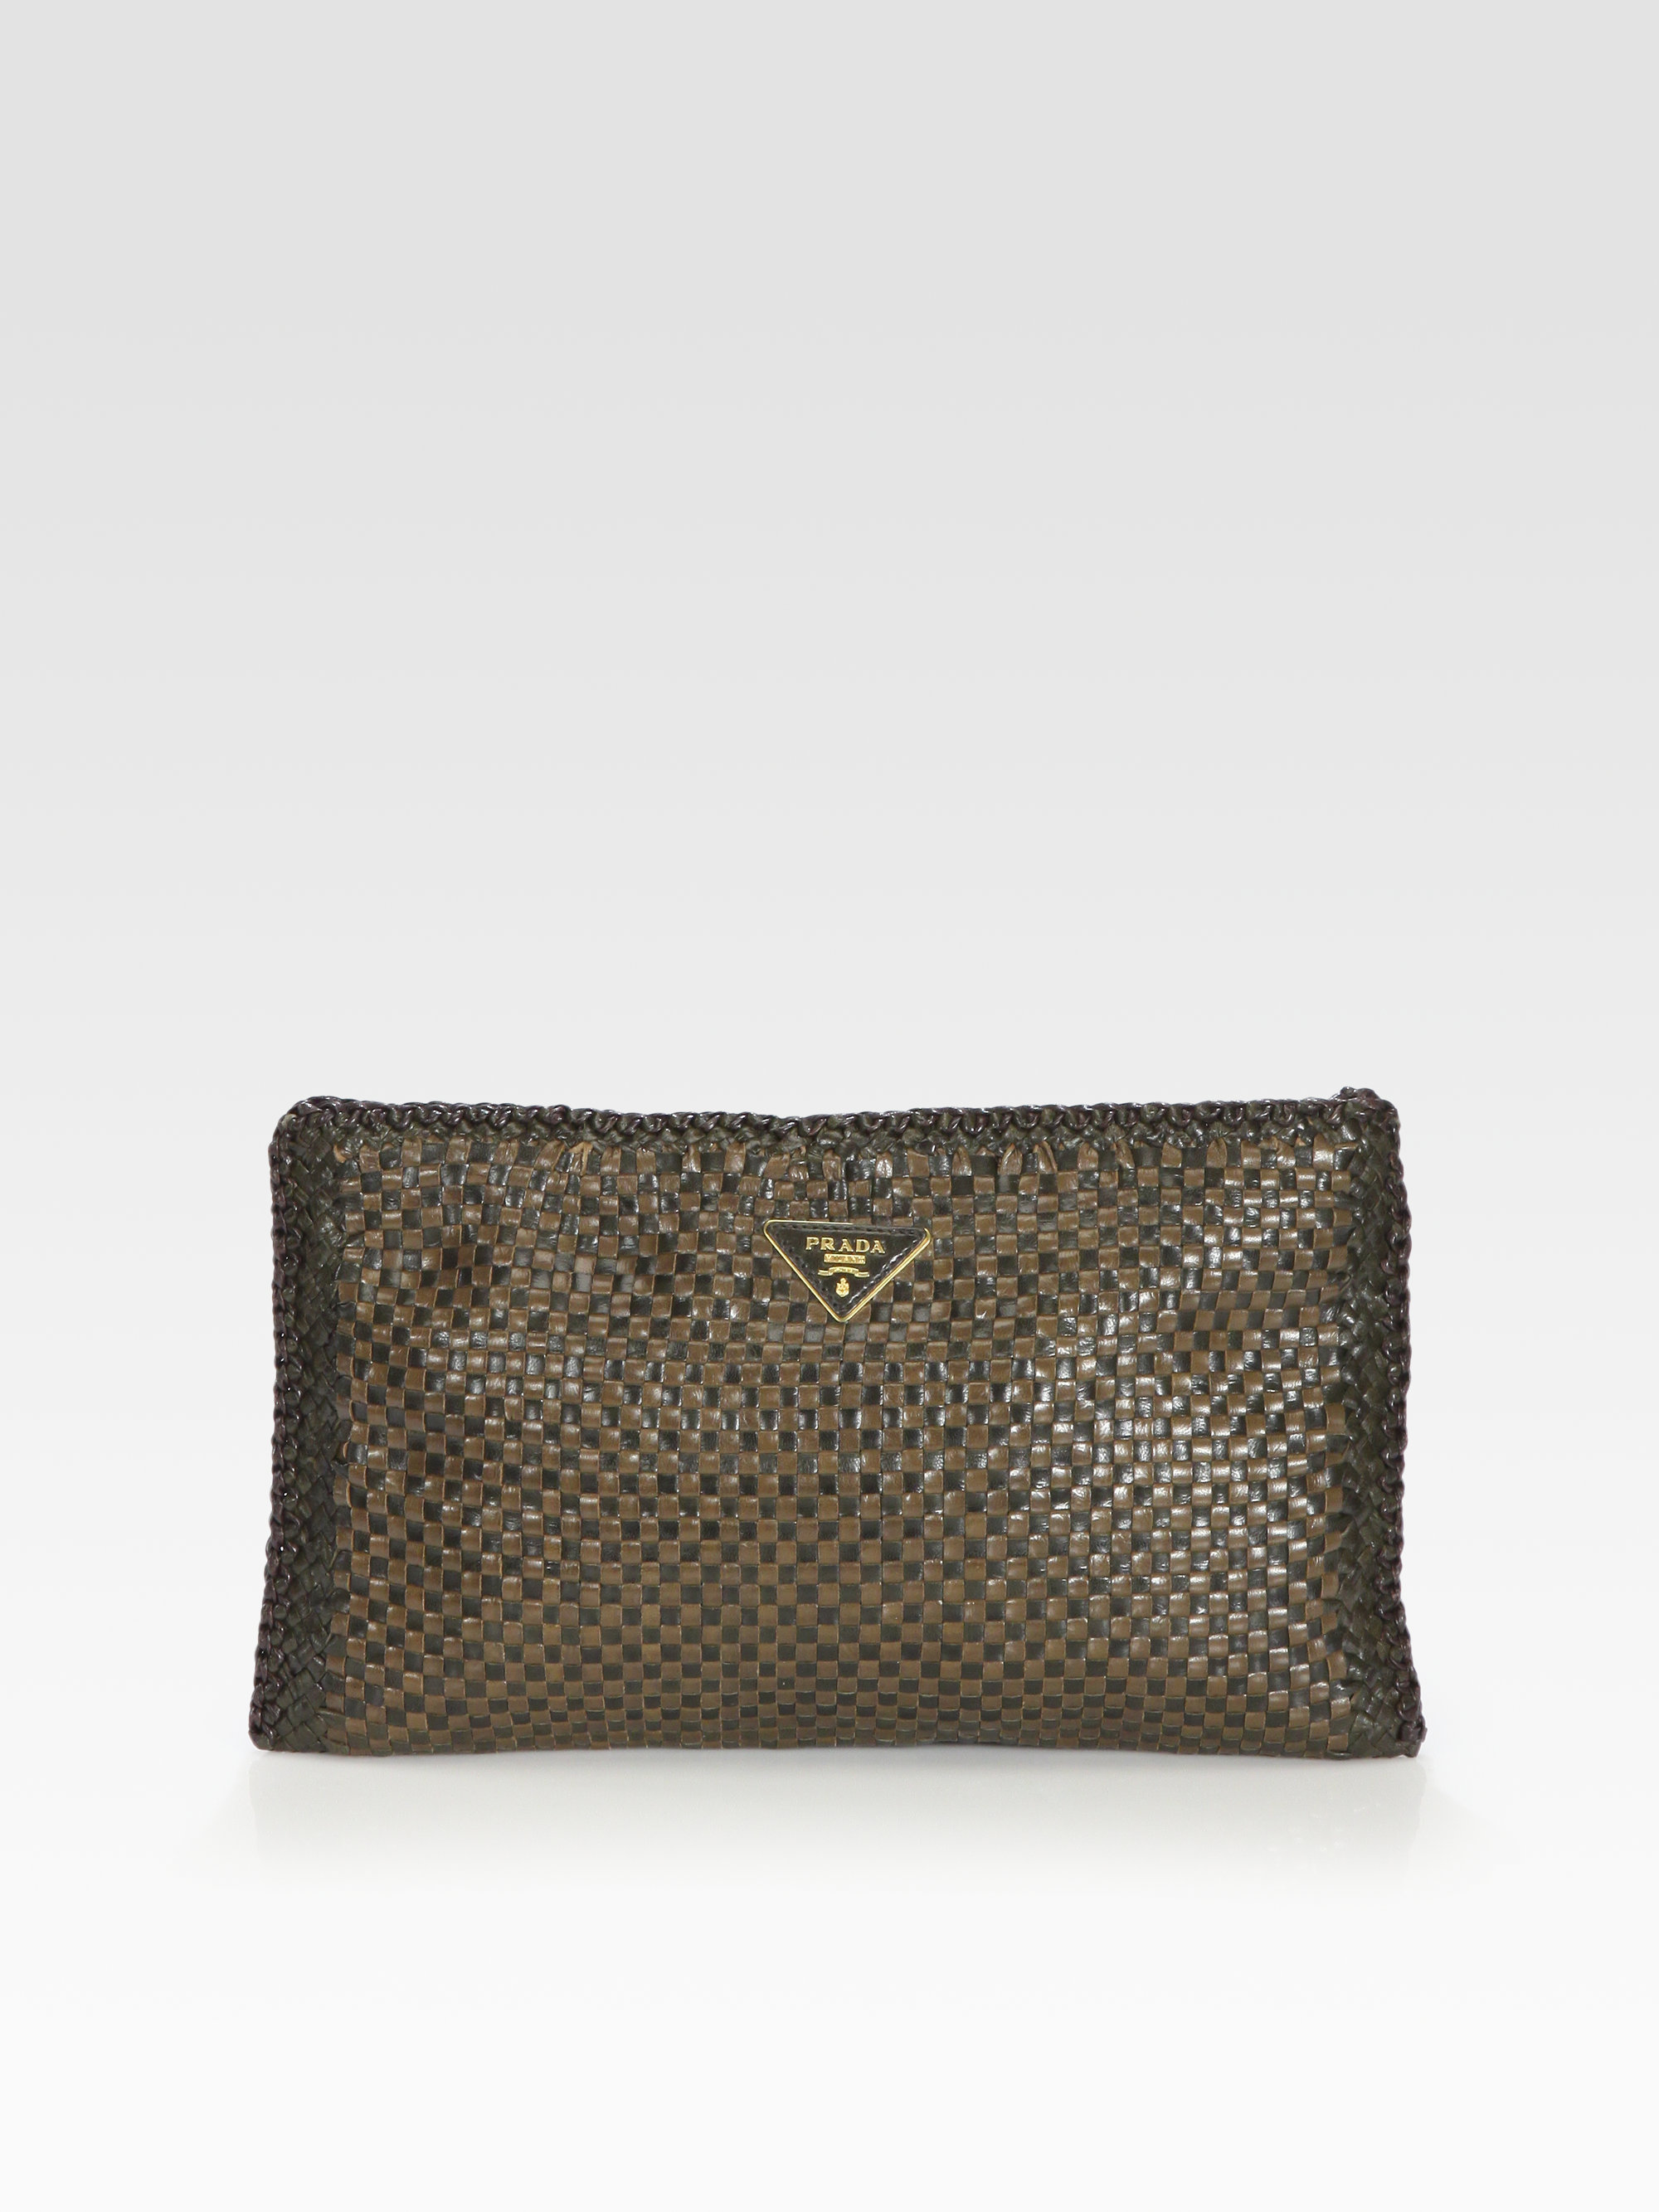 Prada Madras Woven Large Clutch in 